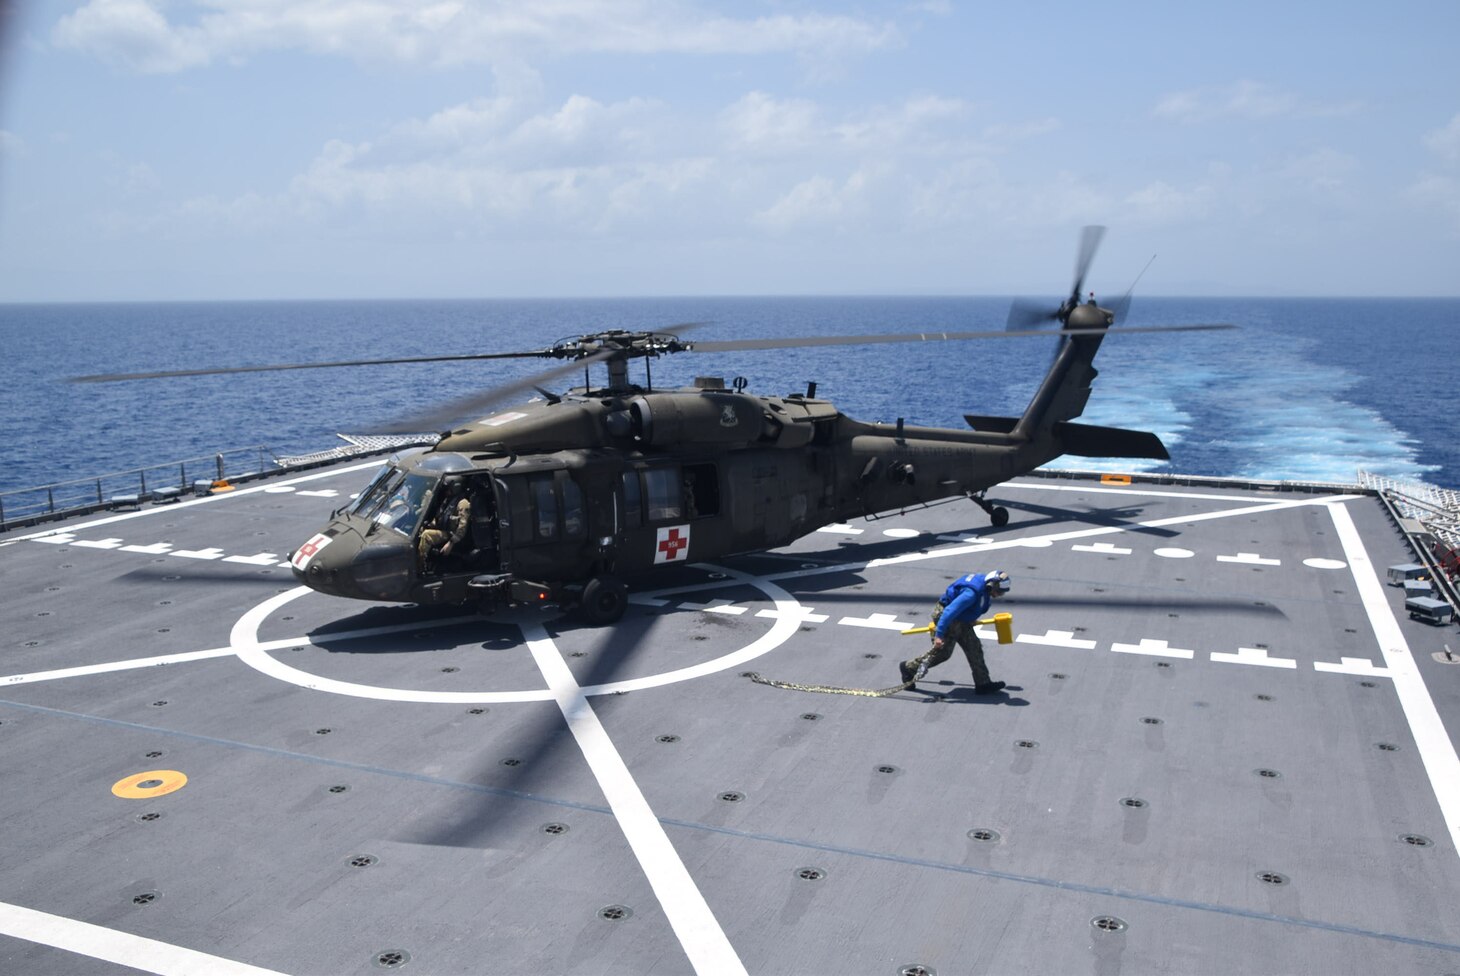 A U.S. Army UH-60 Blackhawk helicopter prepares to take off from the flight deck of the Spearhead-class expeditionary fast transport ship USNS Burlington (T-EPF 10) after refueling, Aug. 21, 2021.